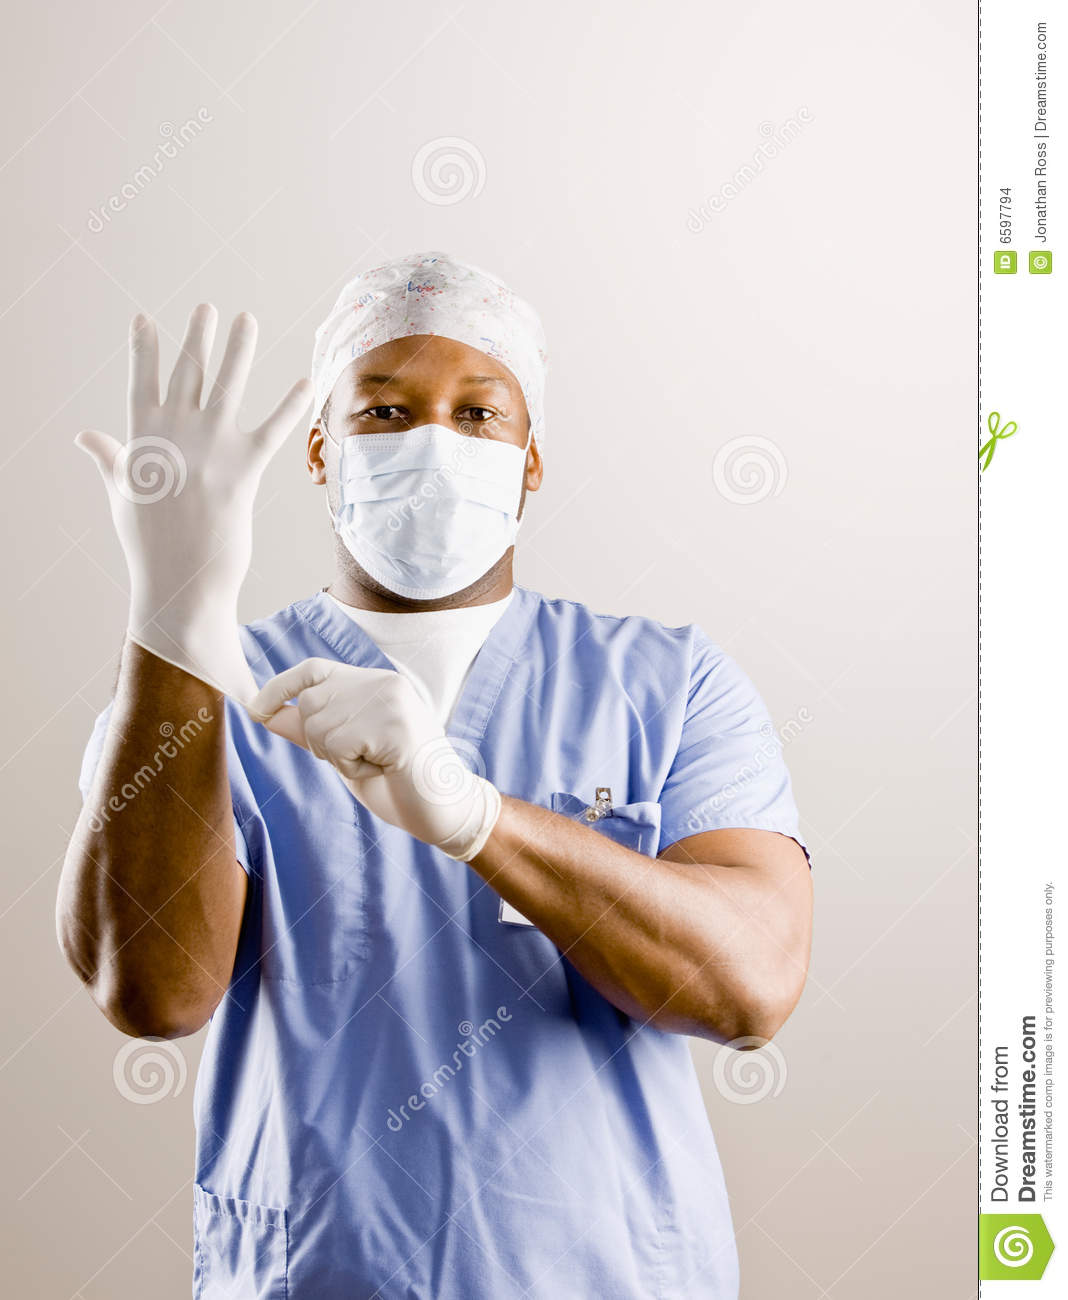 Doctor In Scrubs Surgical Mask Surgical Cap Stock Images   Image    